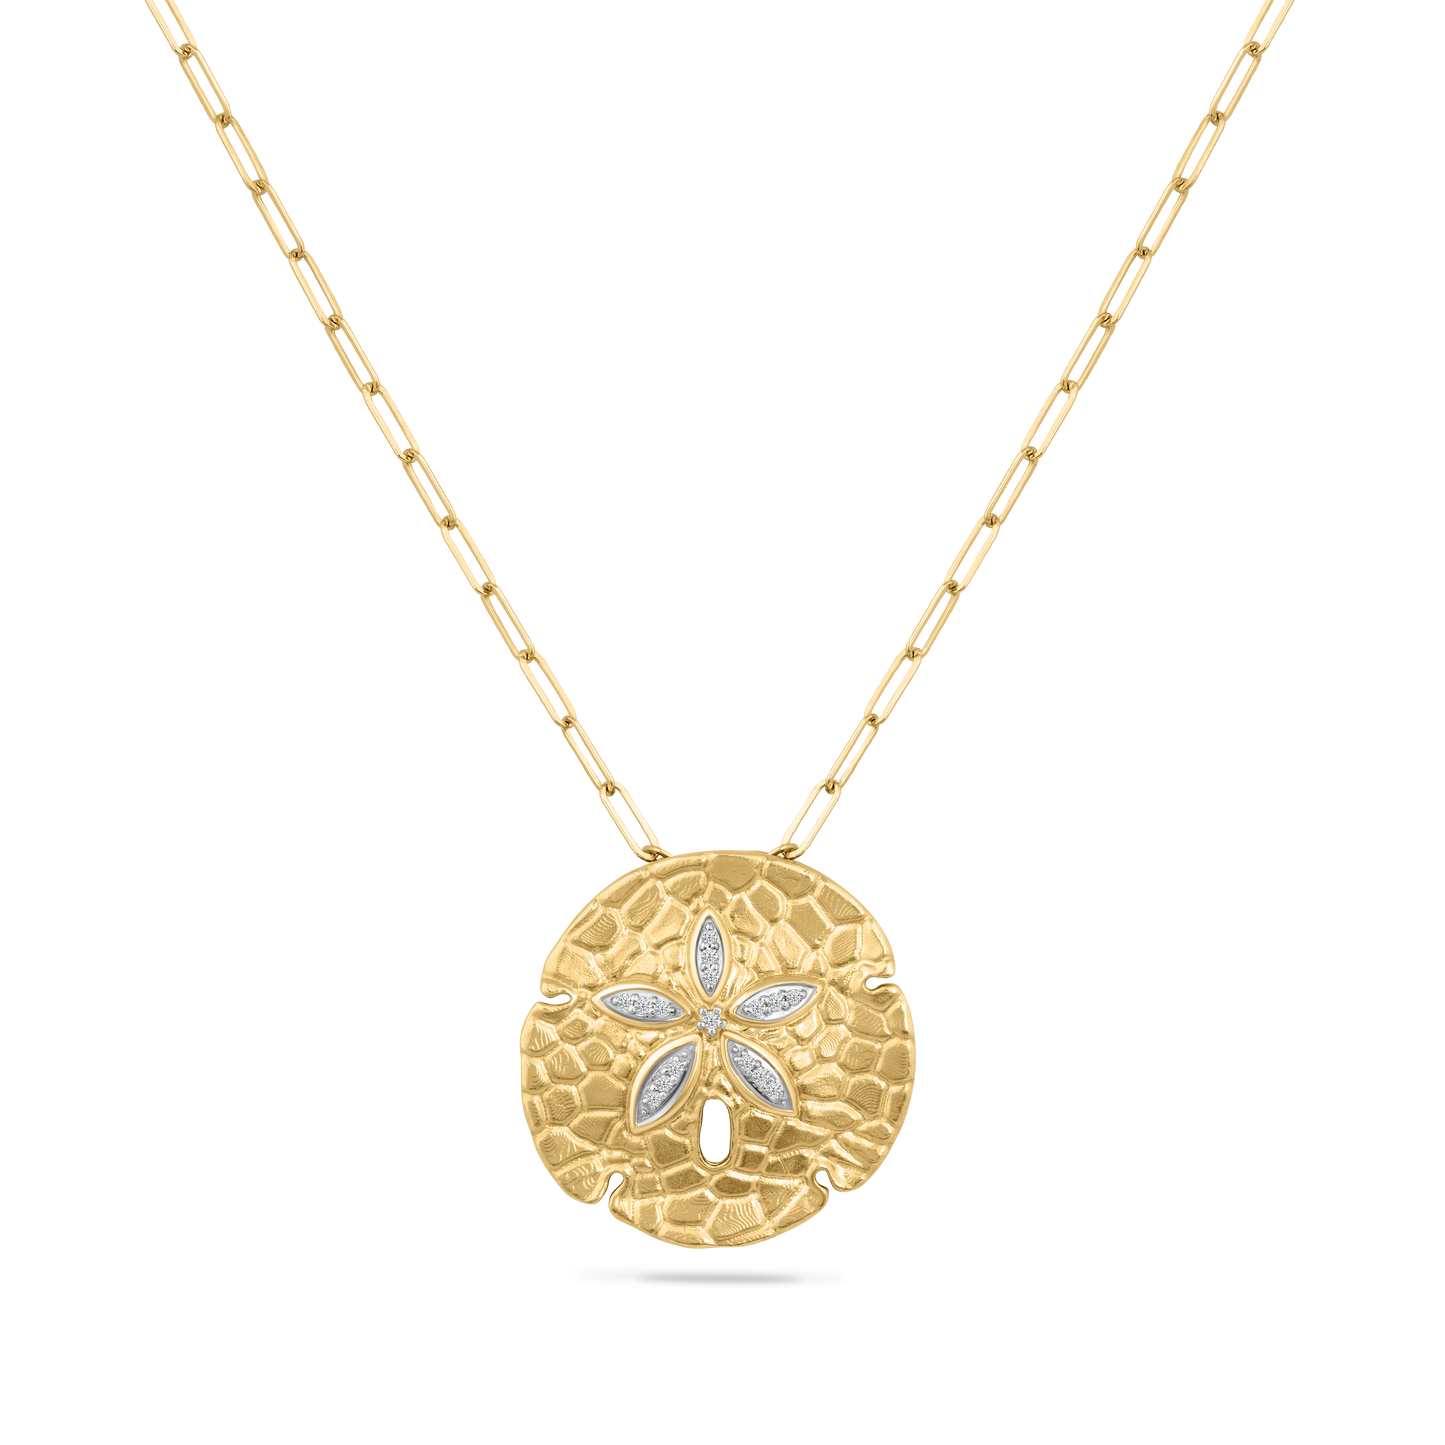 14K SAND DOLLAR PENDANT WITH 16 DIAMONDS 0.09CT ON 18 INCHES CABLE CHAIN